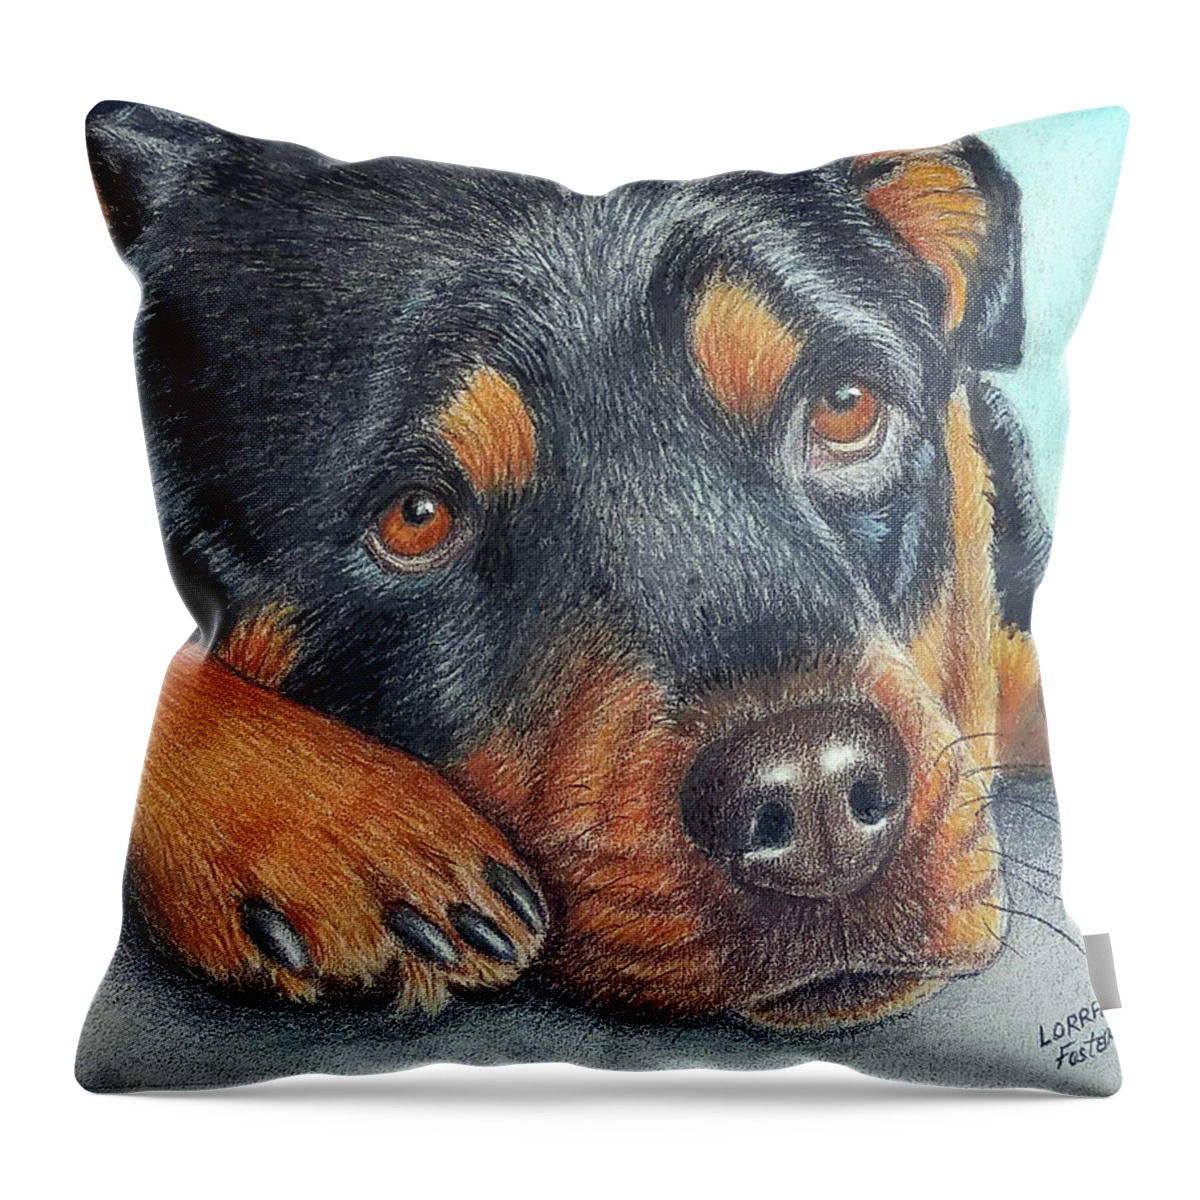 Dogs Throw Pillow featuring the drawing Rotti Pup by Lorraine Foster